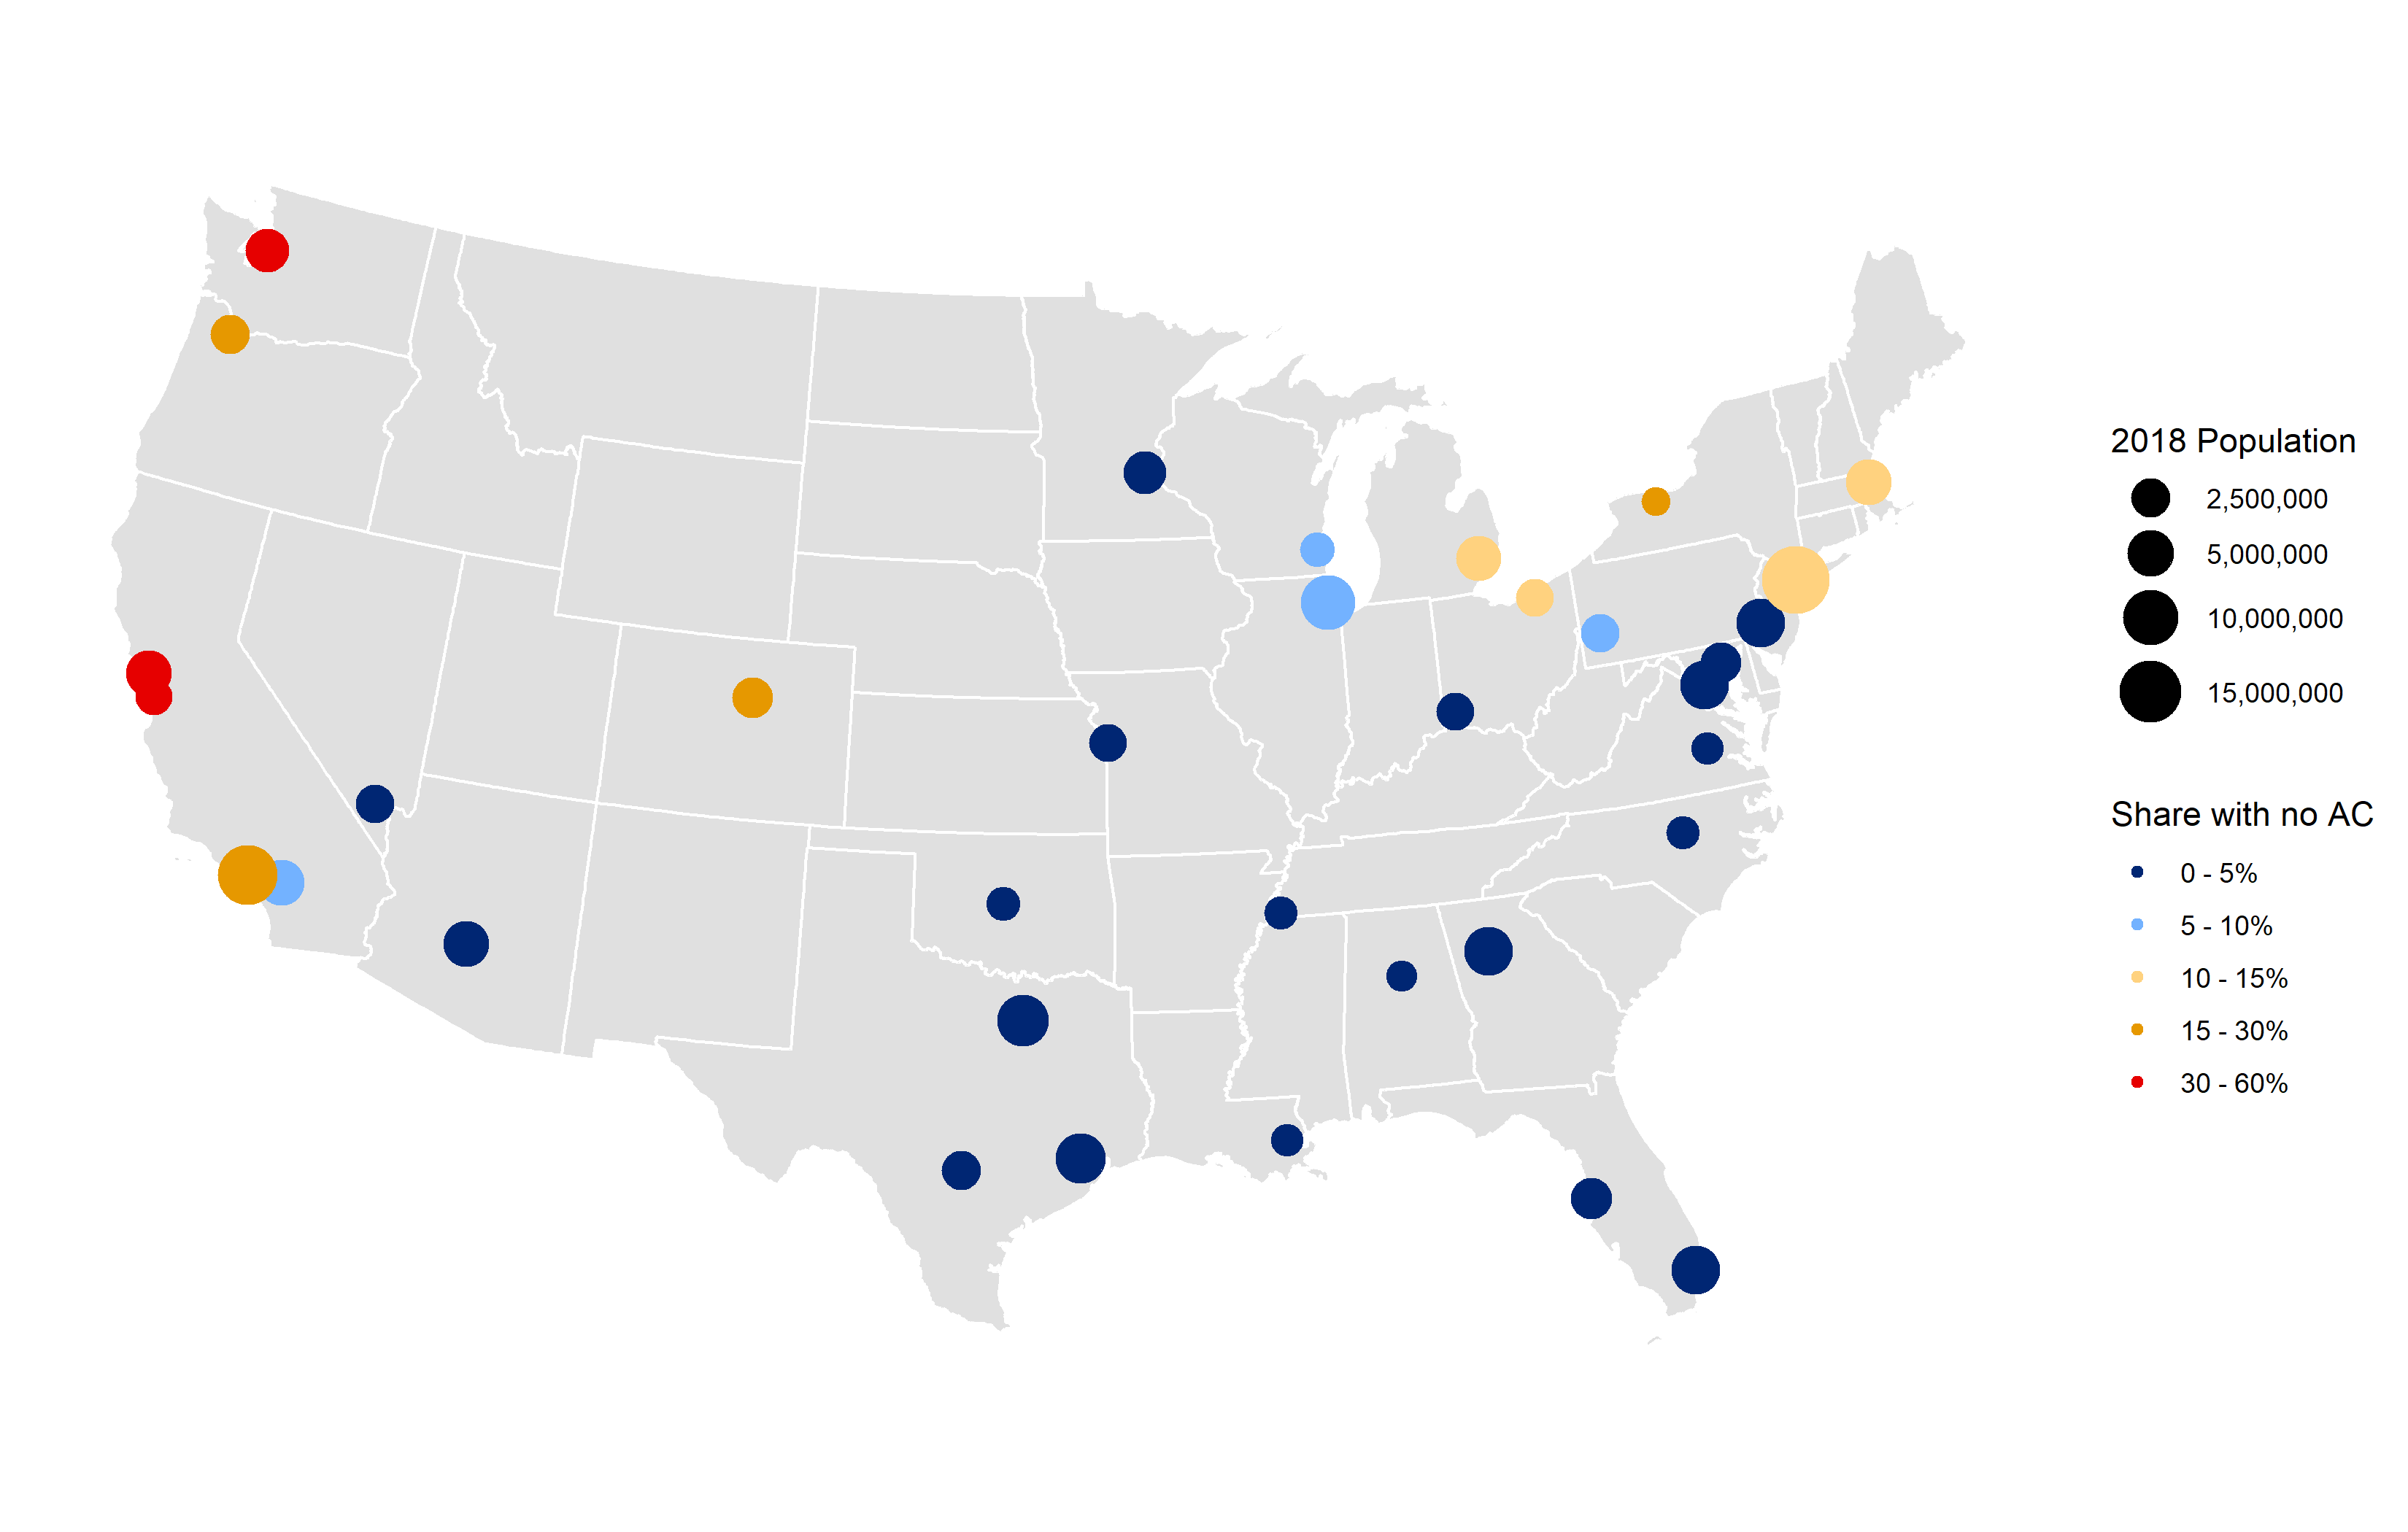 US map with colored dots for AC access prevelance